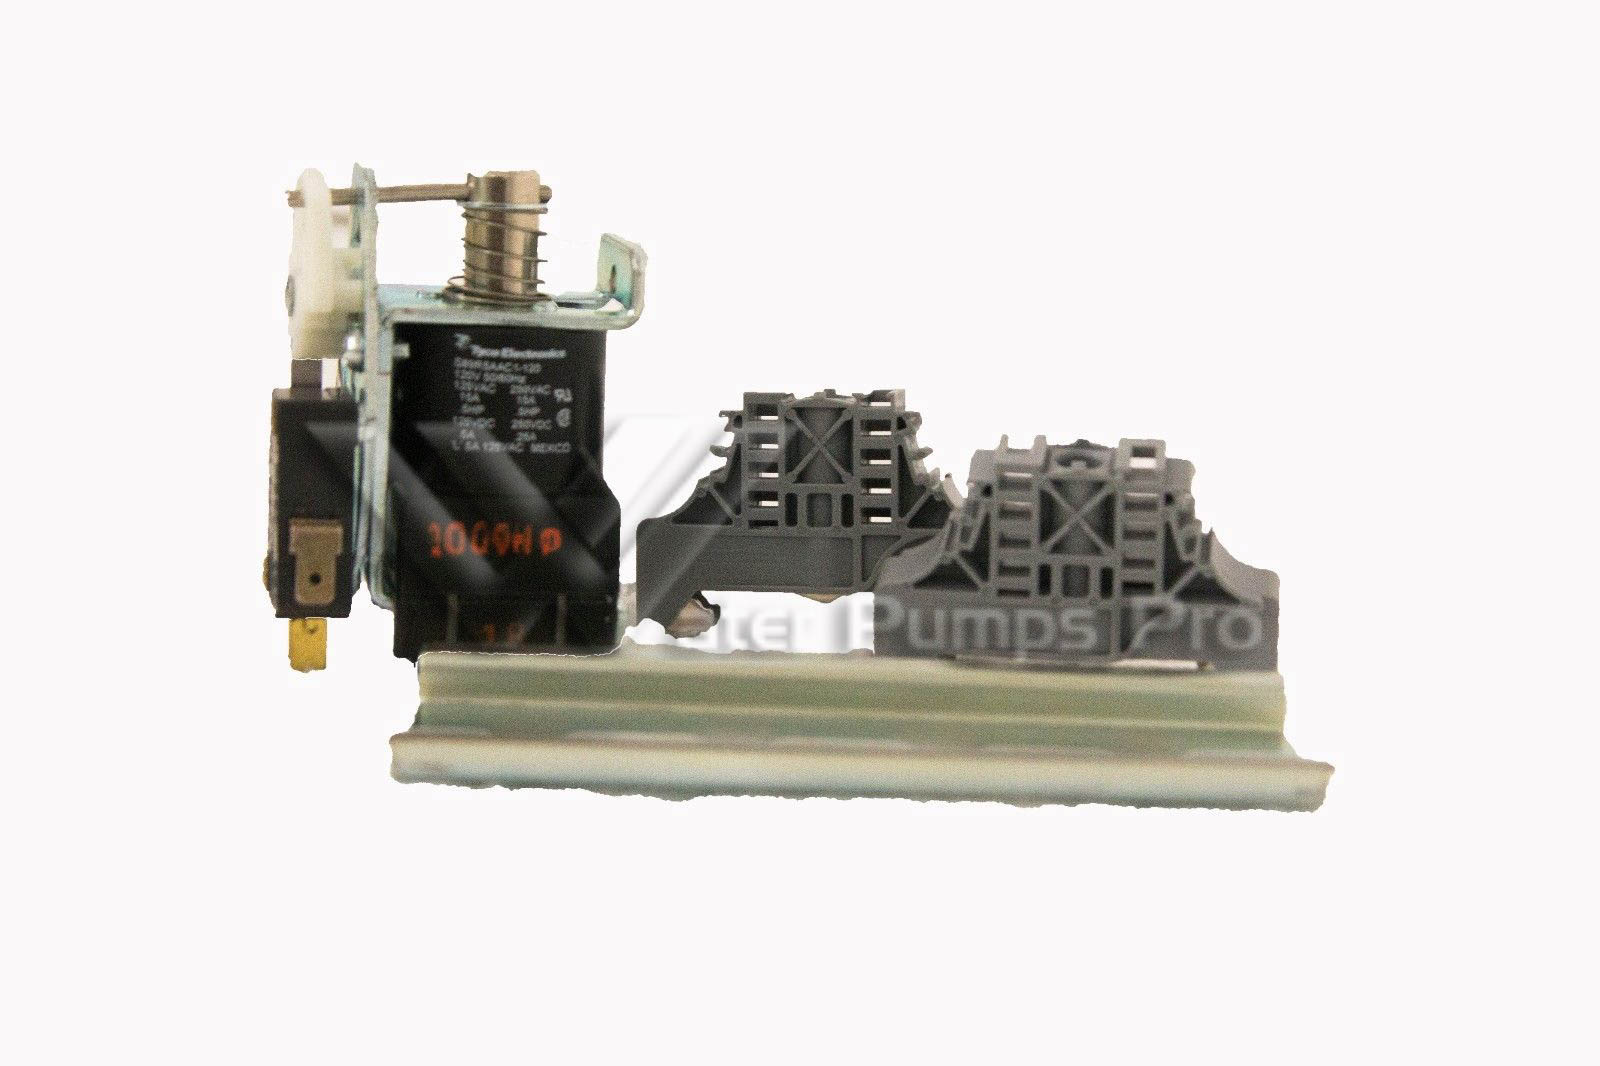 Goulds RB-15 - Alternator (Latching Relay)